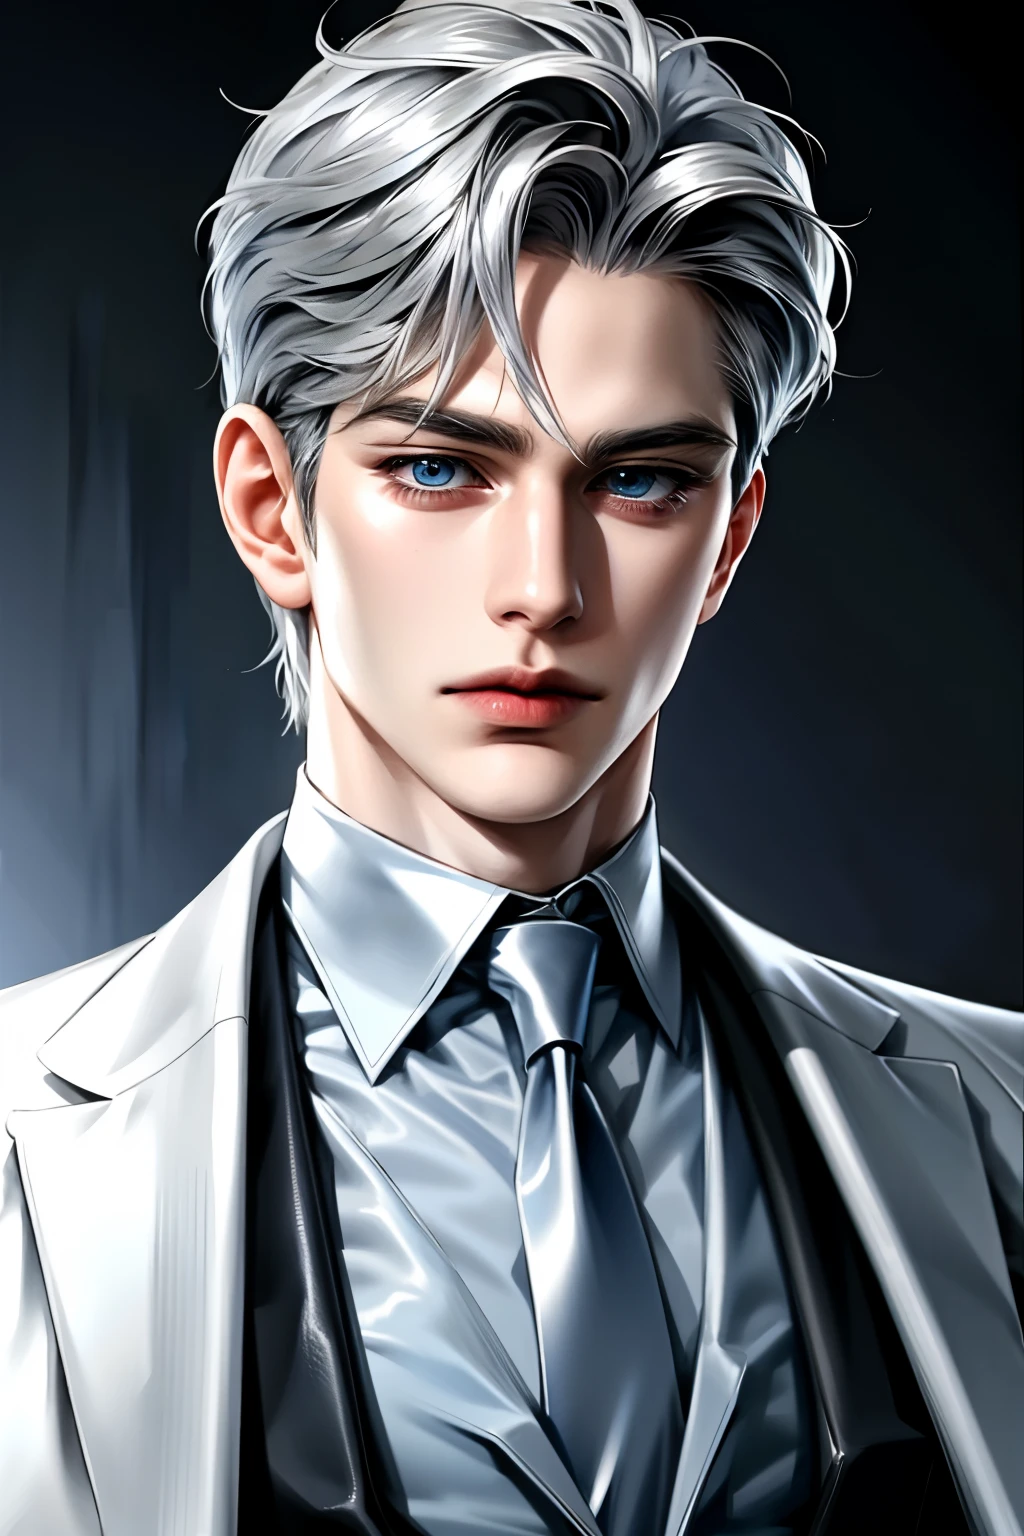 Fat, silver hair, blue eyes, serious sharp features, white skin, handsome, shirt, formal jacket